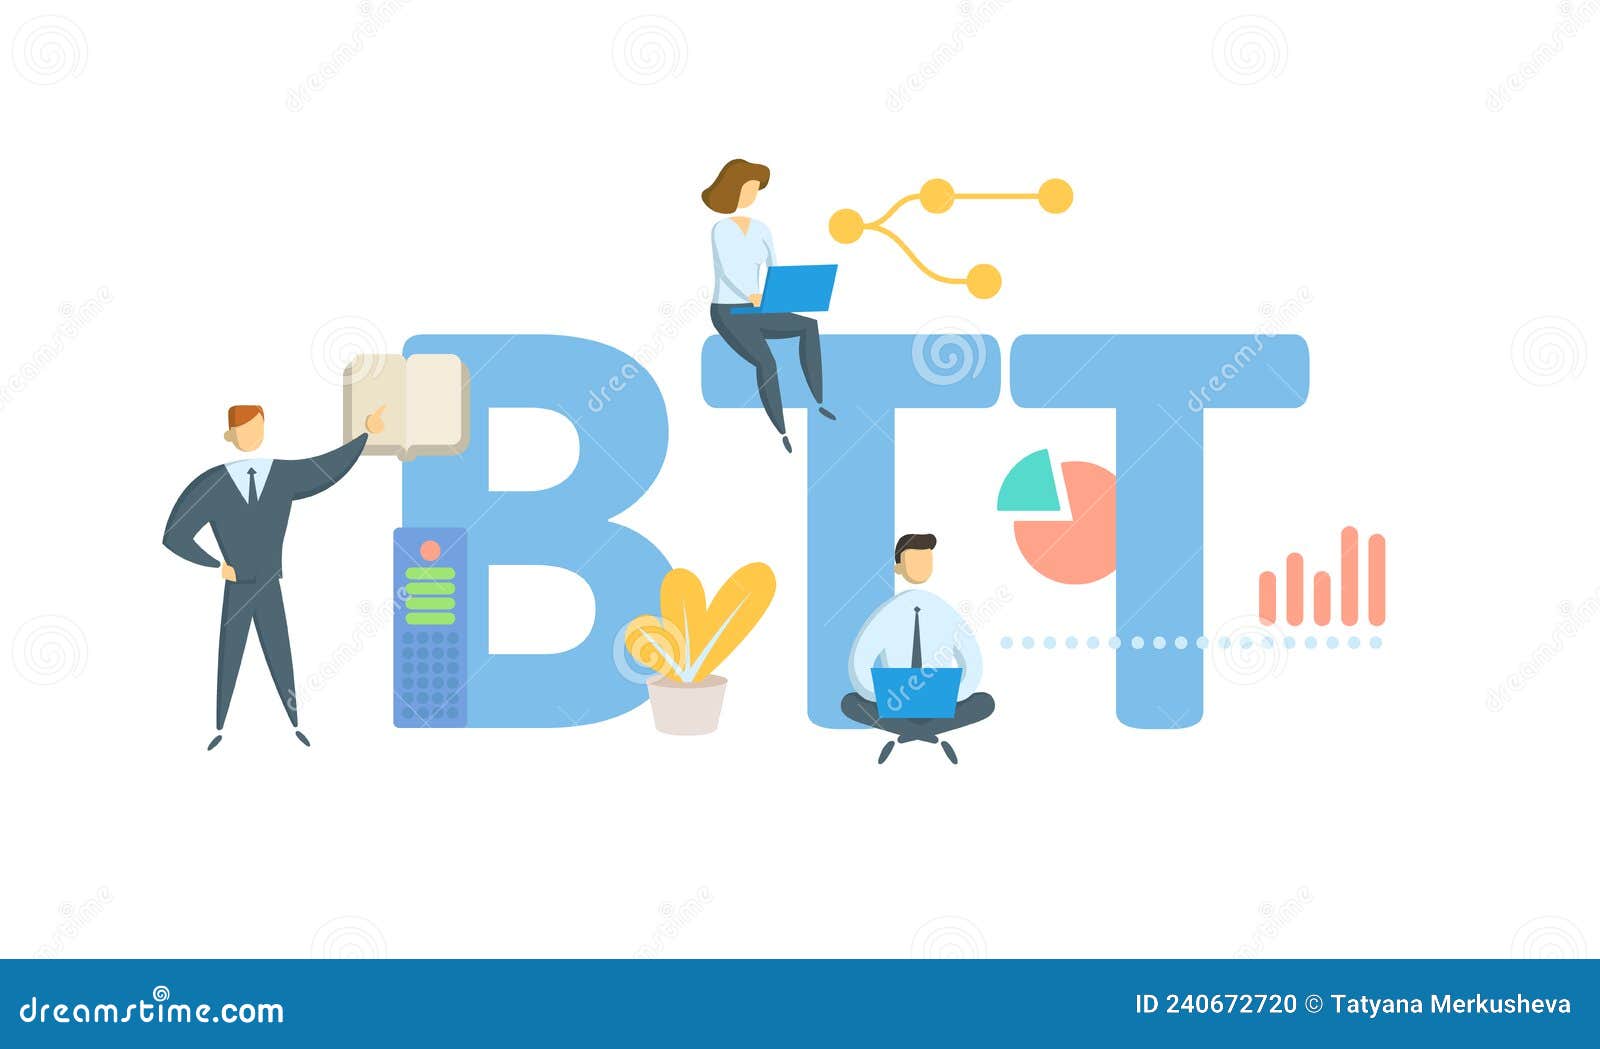 btt, business transfer tax. concept with keyword, people and icons. flat  .  on white.